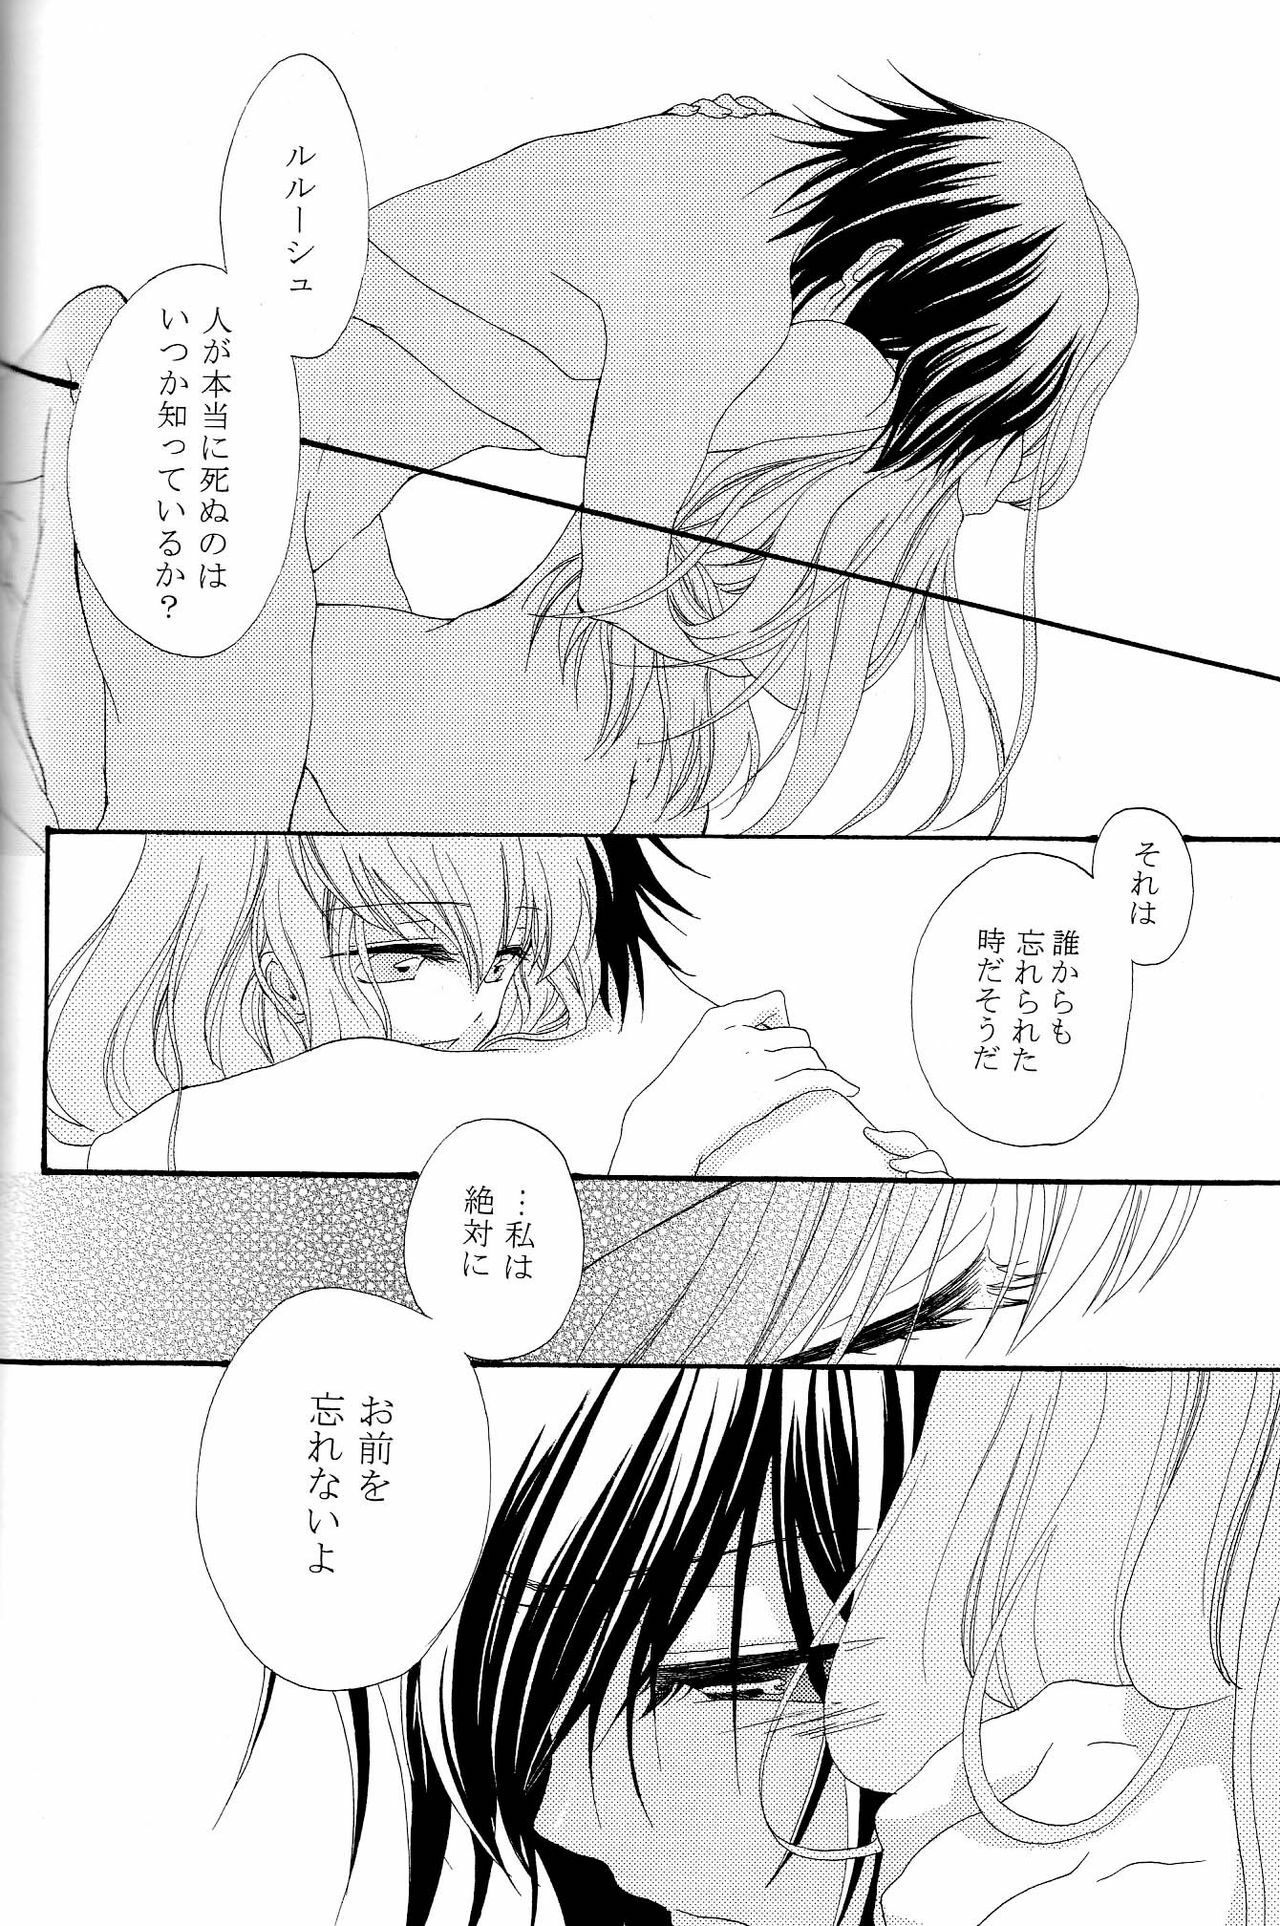 [APRICOT TEA] The last love letter presented to my dear only partner. (Code Geass) page 29 full